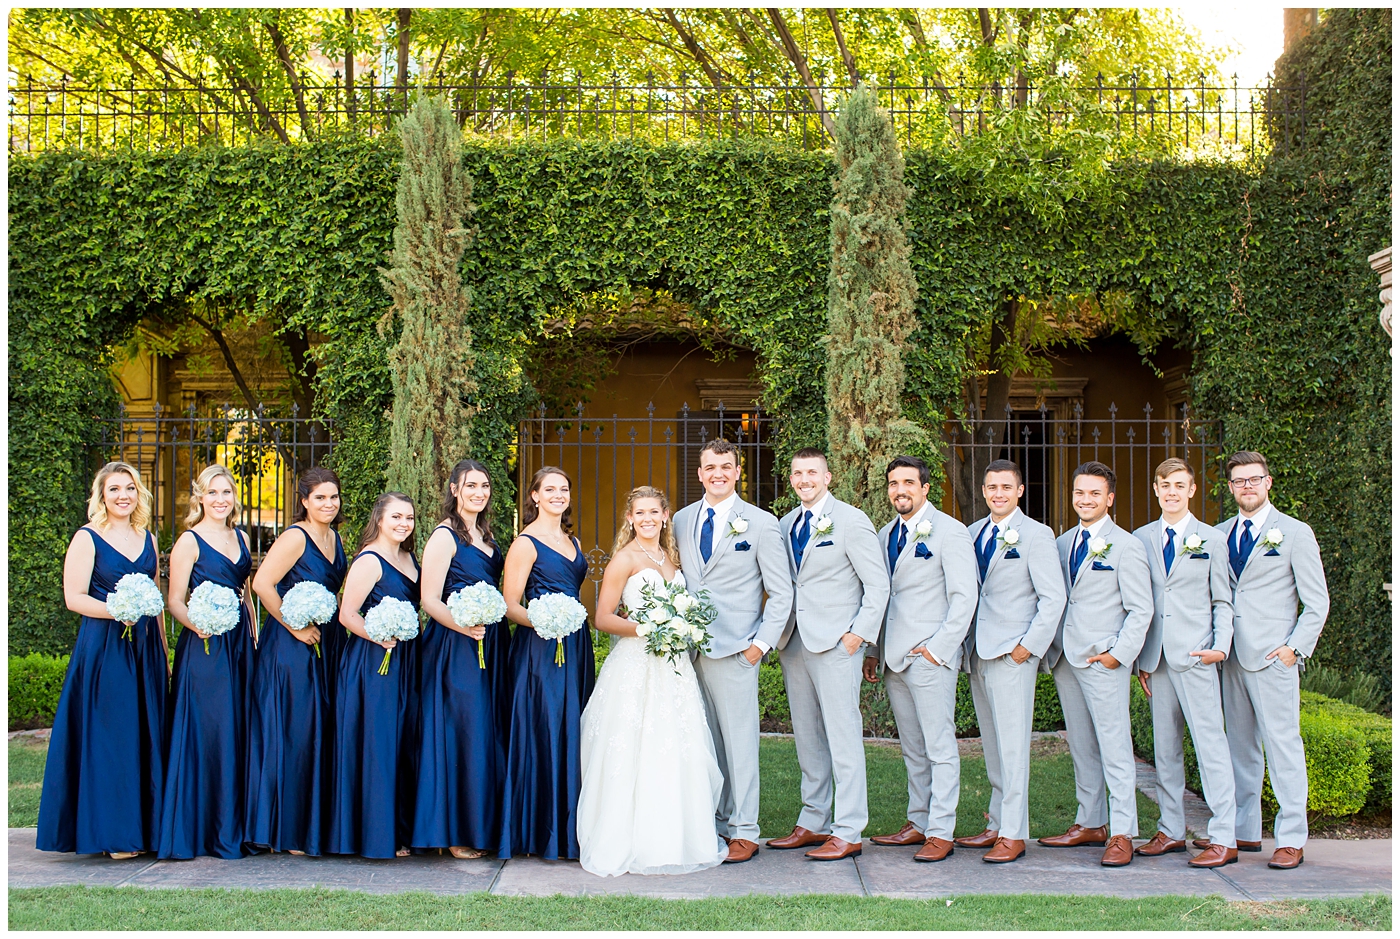 bride in strapless lace dress with white flower bouquet with roses and hydrangeas with bridesmaids in royal blue long dresses with blue hydrangeas bouquets with groom in grey suit with blue tie and white rose boutonniere and groomsmen in grey suits with royal blue vests and ties wedding party group shot 